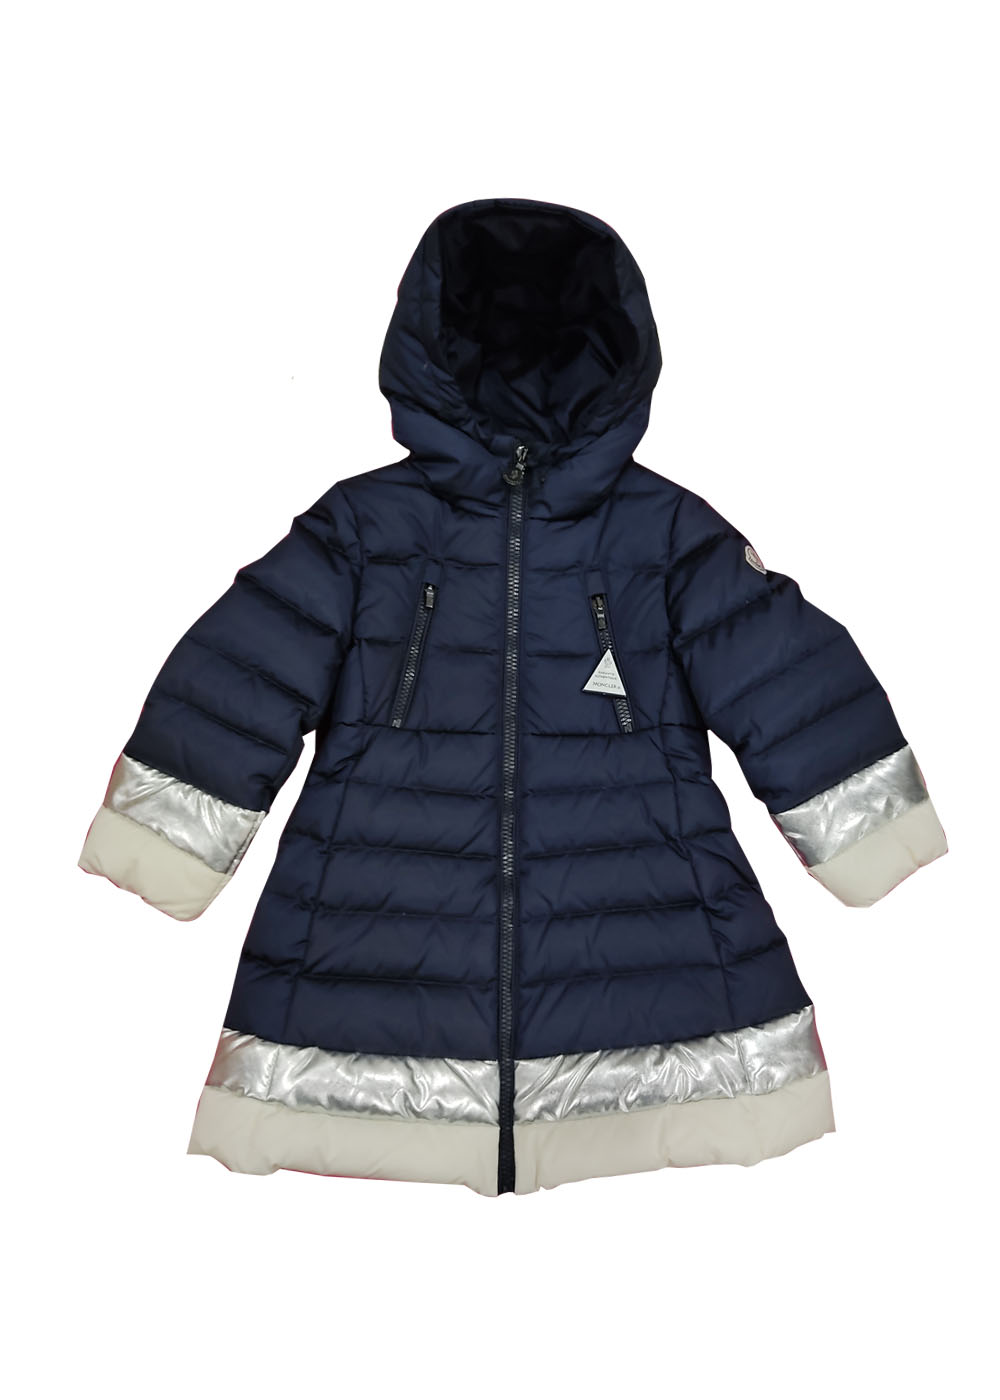 Featured image for “MONCLER PIUMINO LUNGO”